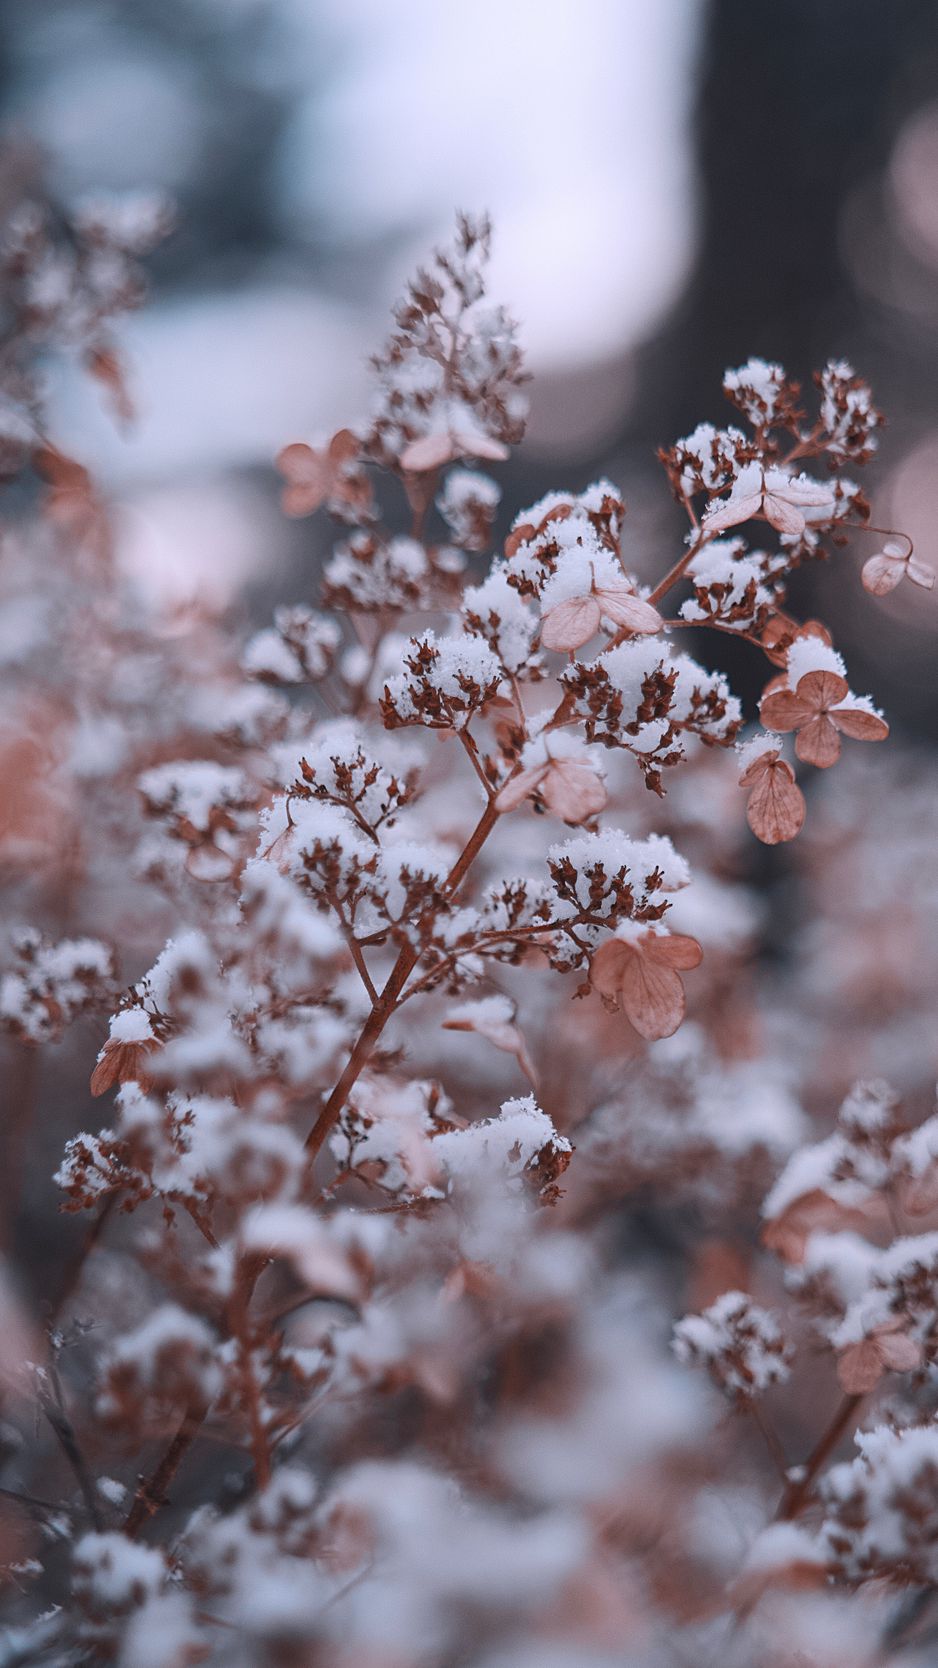 Download wallpaper 938x1668 branches, flowers, snow, macro, plant iphone  8/7/6s/6 for parallax hd background